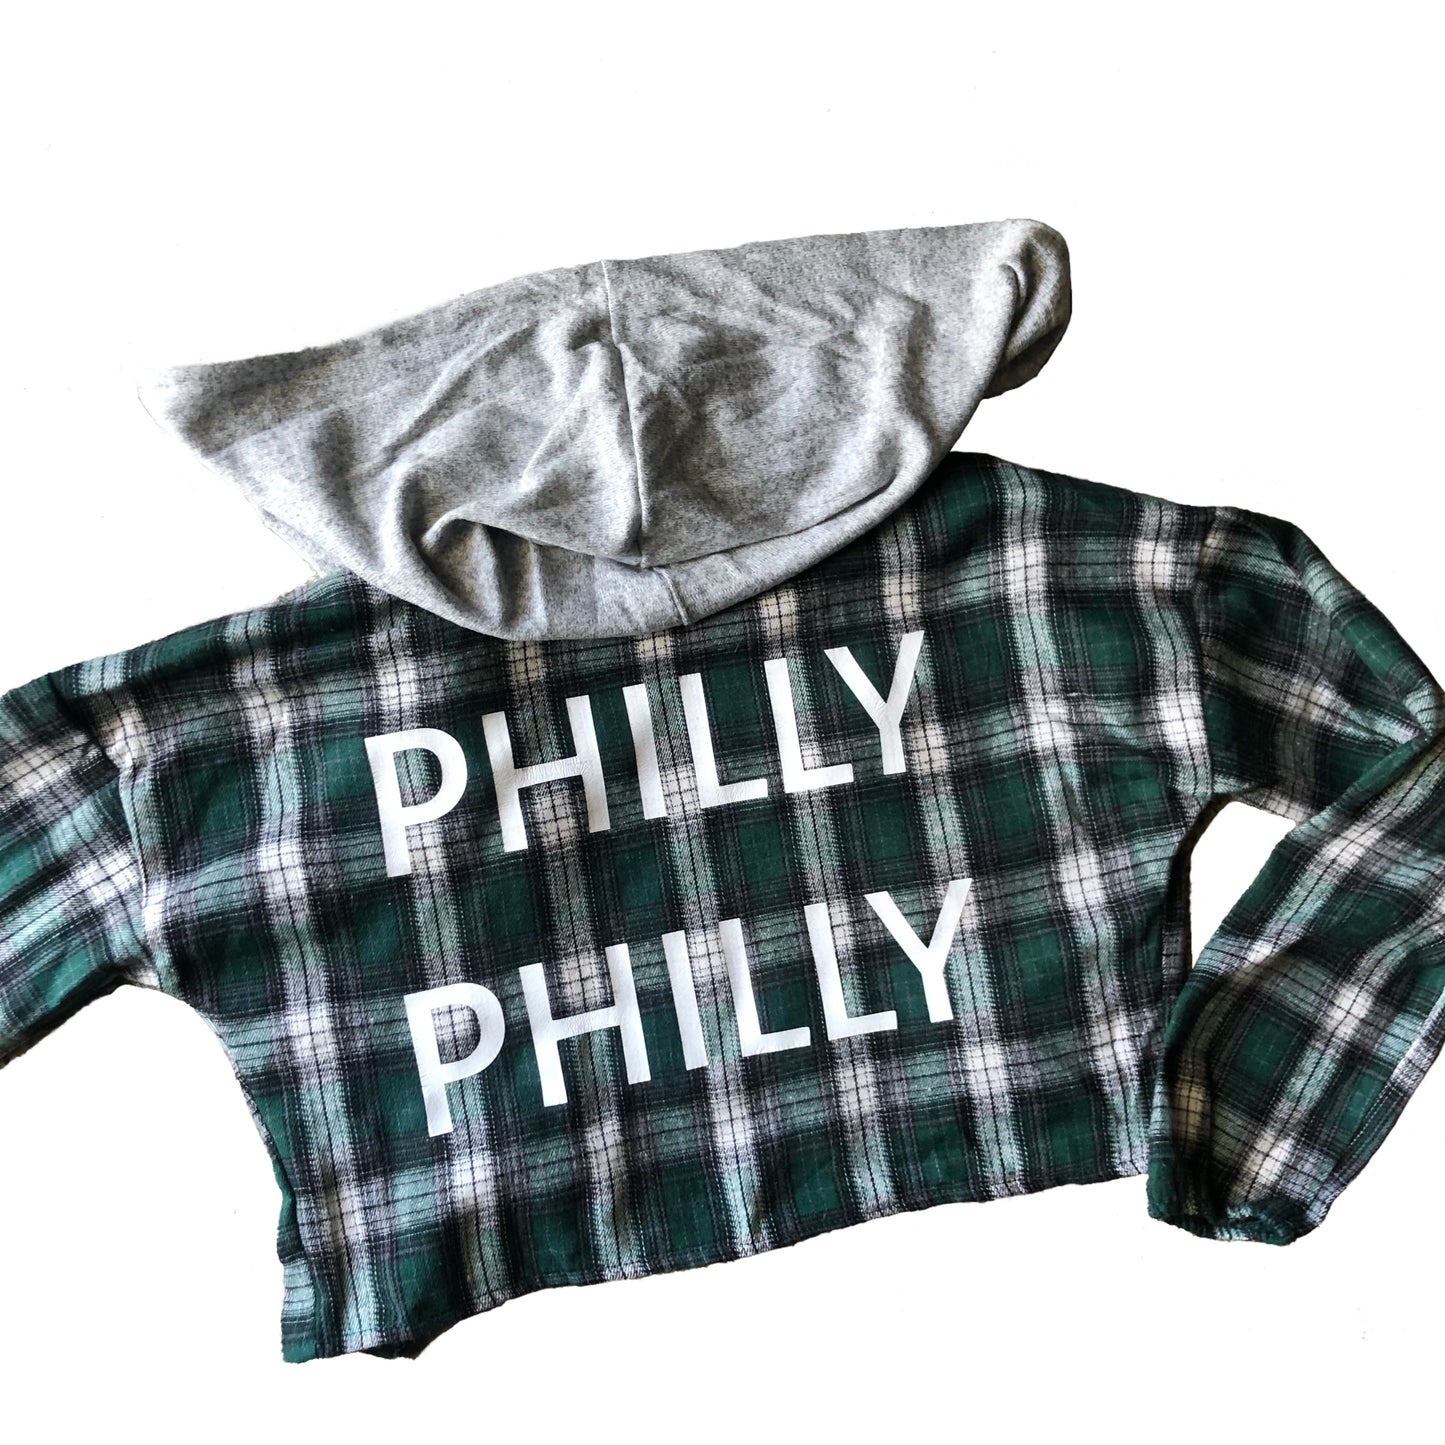 Cropped Philly Philly flannel